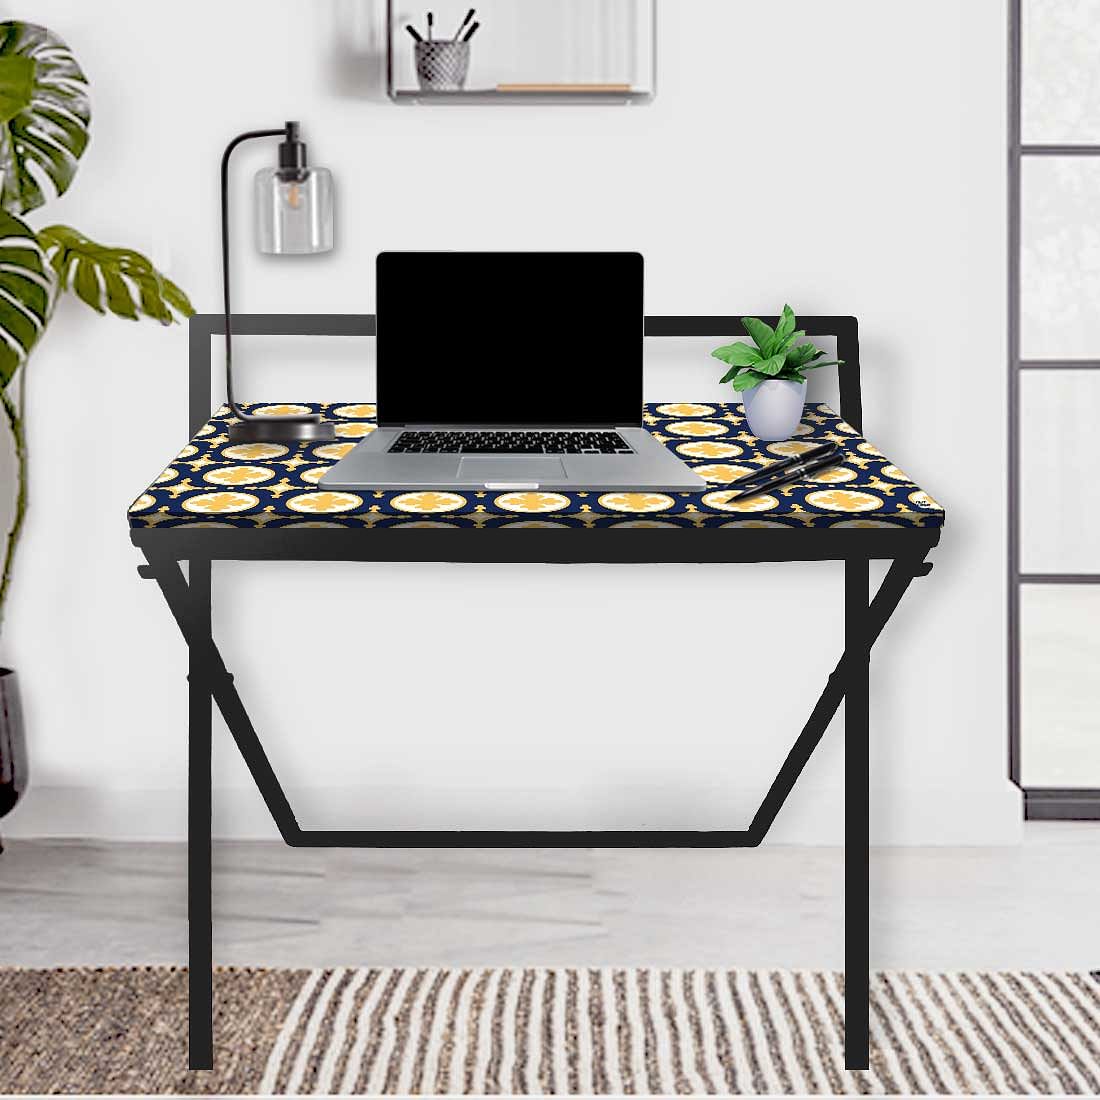 Foldable Table for Office Work at Home - Elegance Spanish Nutcase